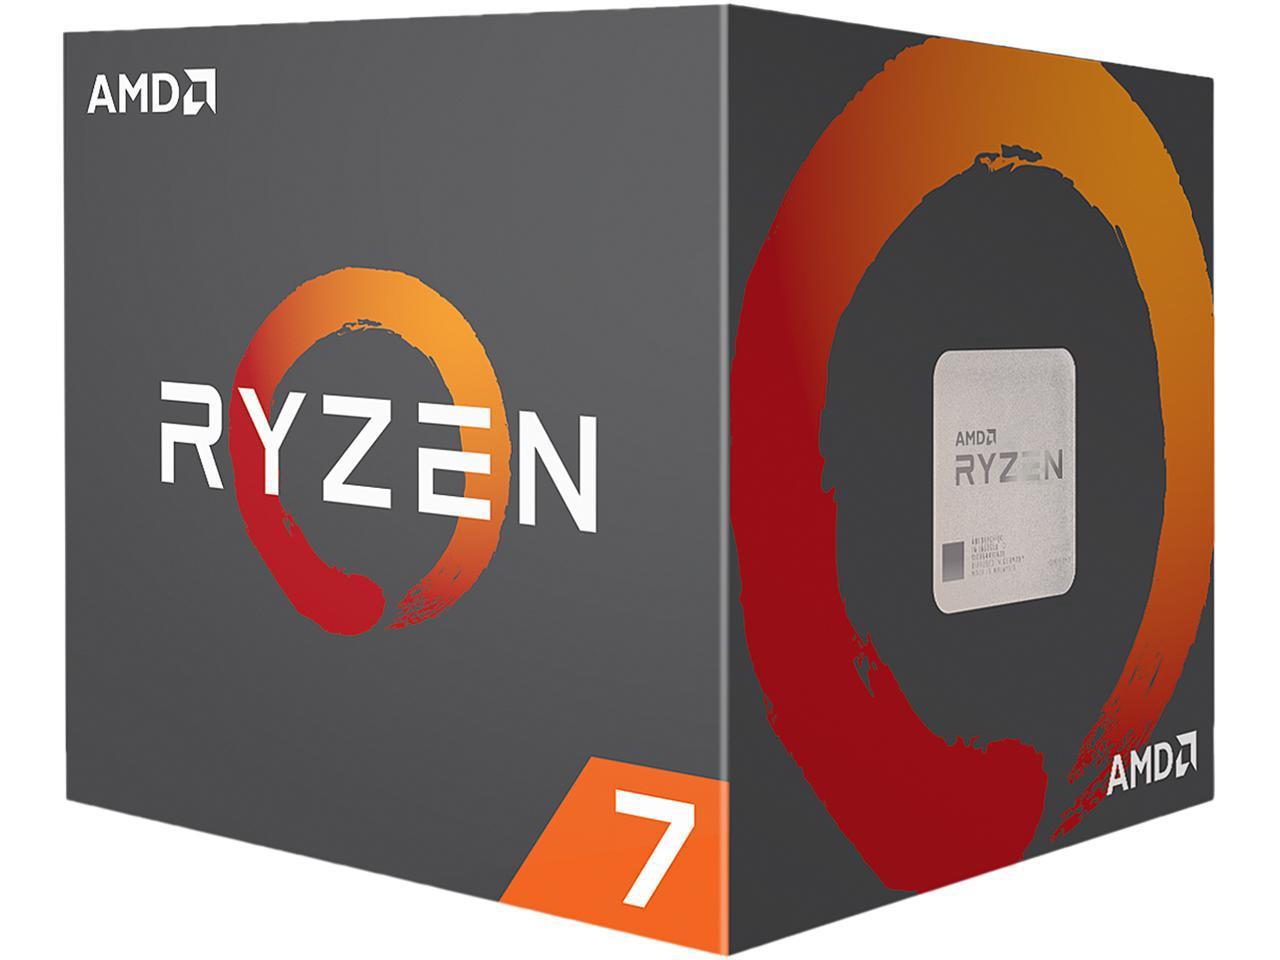 Image for Grab an AMD Ryzen 7 2700 3.2 GHz CPU with a free copy of The Division 2 for $230 today